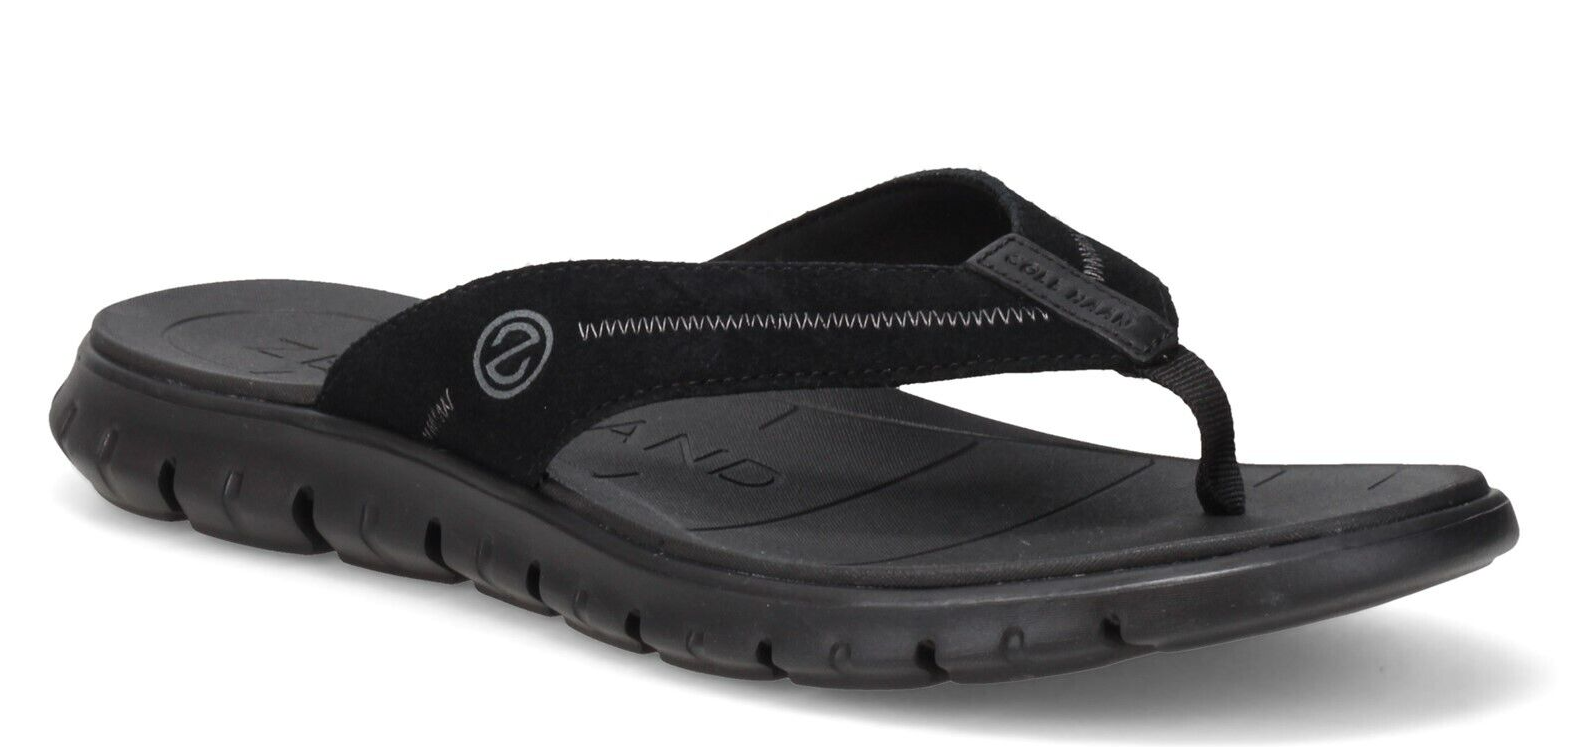 Primary image for Cole Haan Zerogrand Thong LX Men's Black Leather LTE Thong Sandal C35173